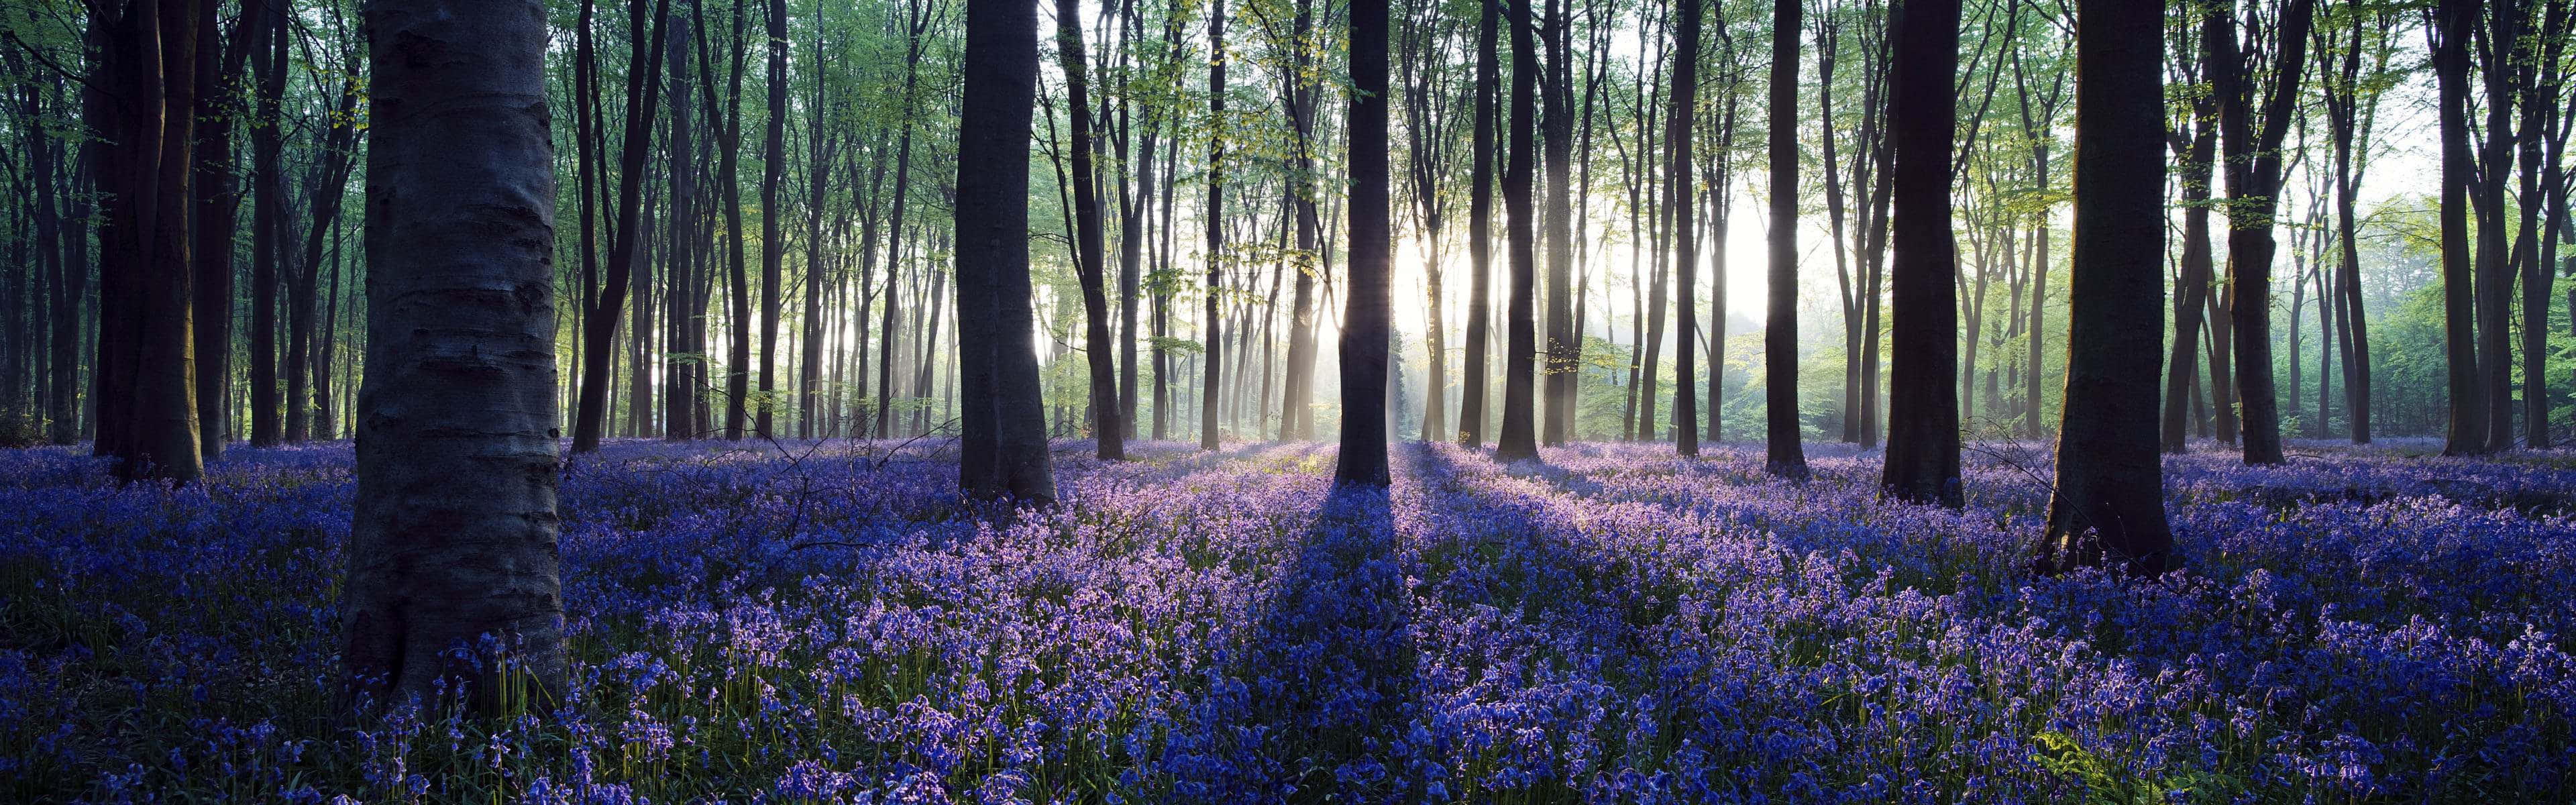 Bluebells In The Forest As A Panoramic Desktop